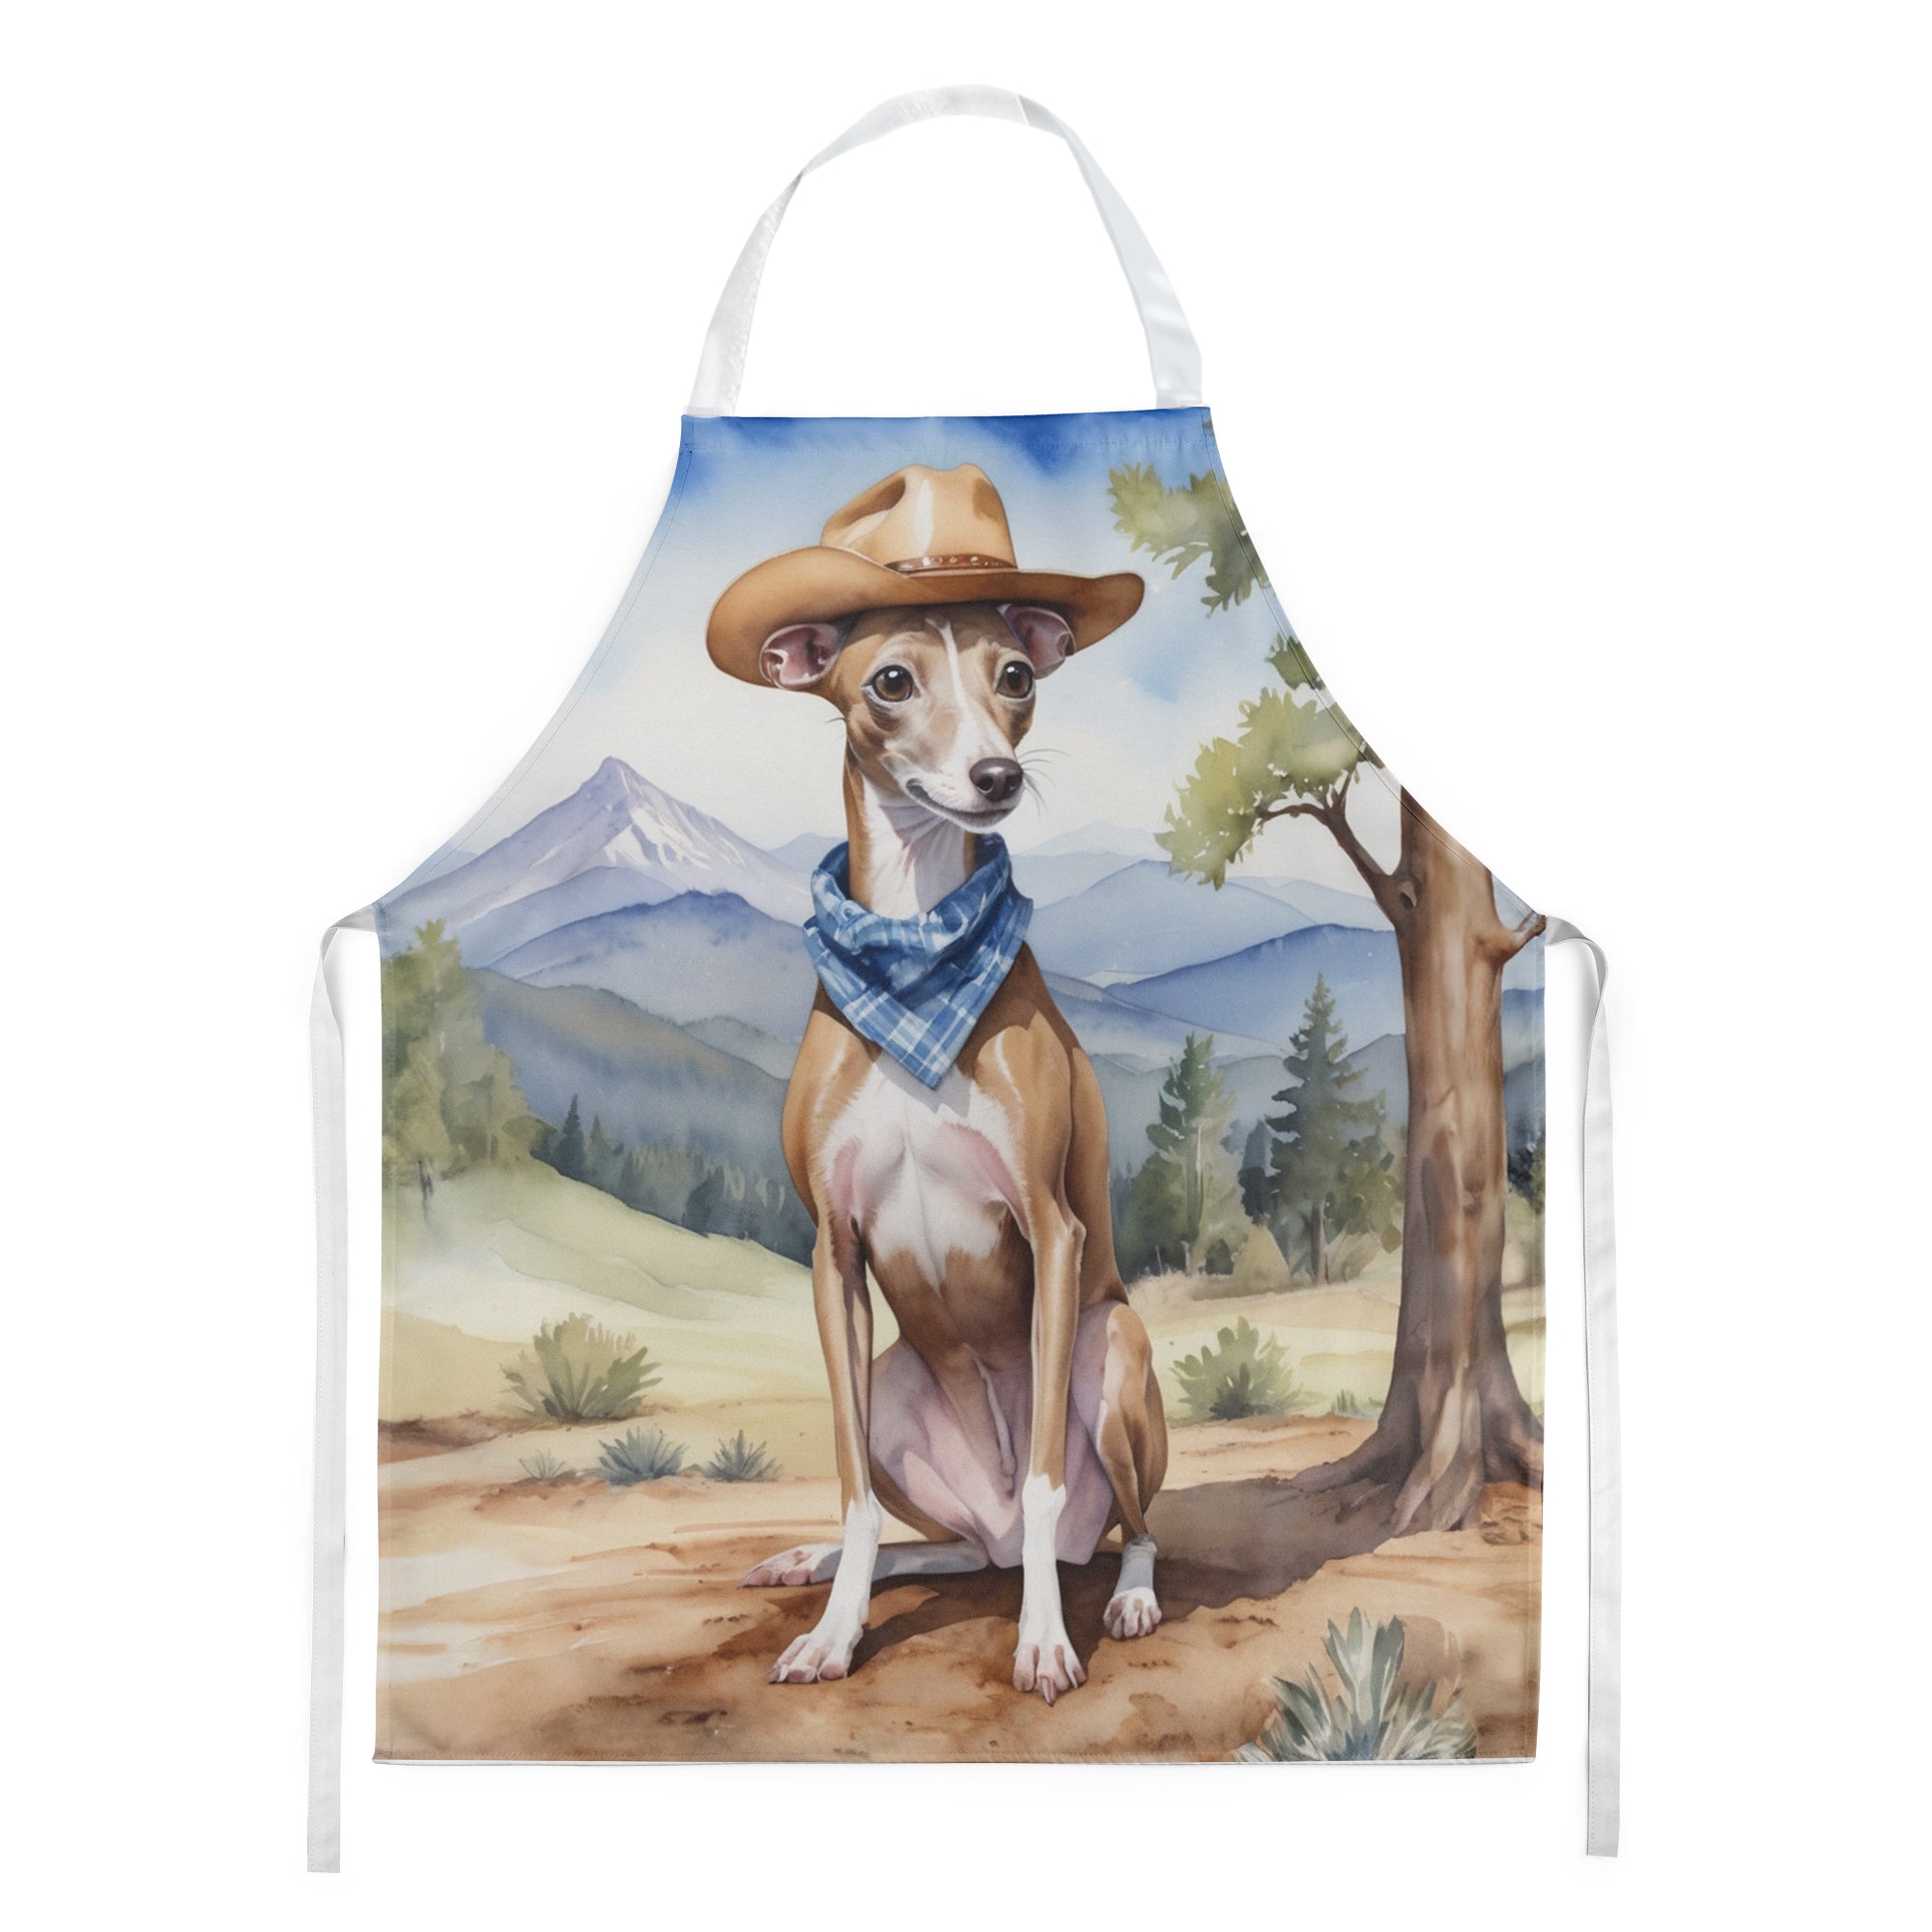 Buy this Italian Greyhound Cowboy Welcome Apron